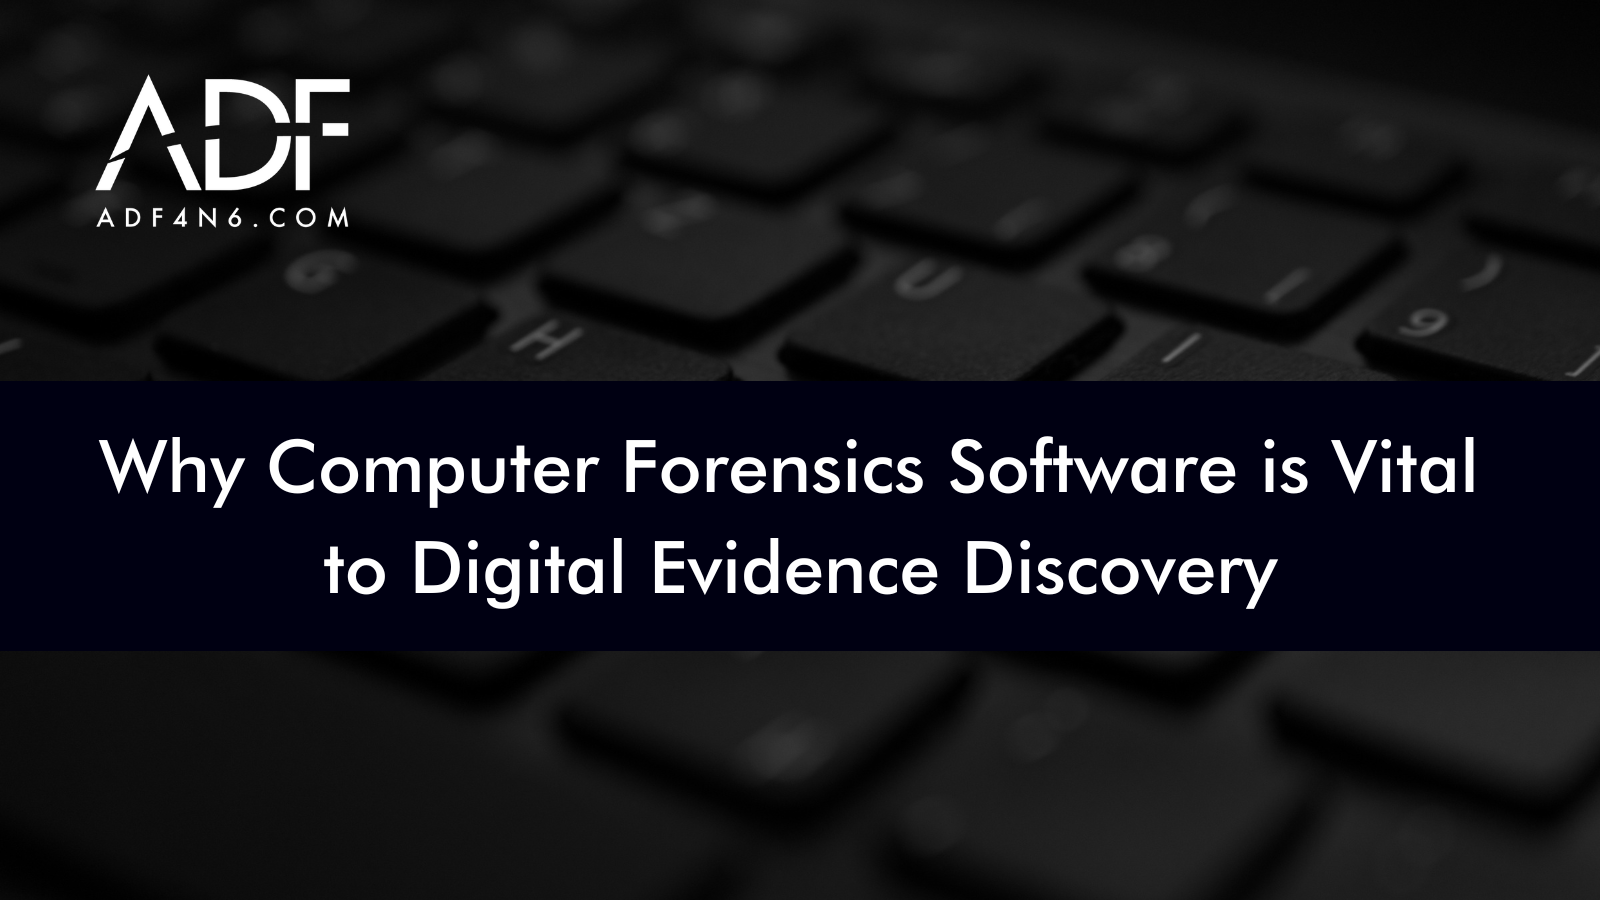 Why Computer Forensics Software is Vital to Digital Evidence Discovery